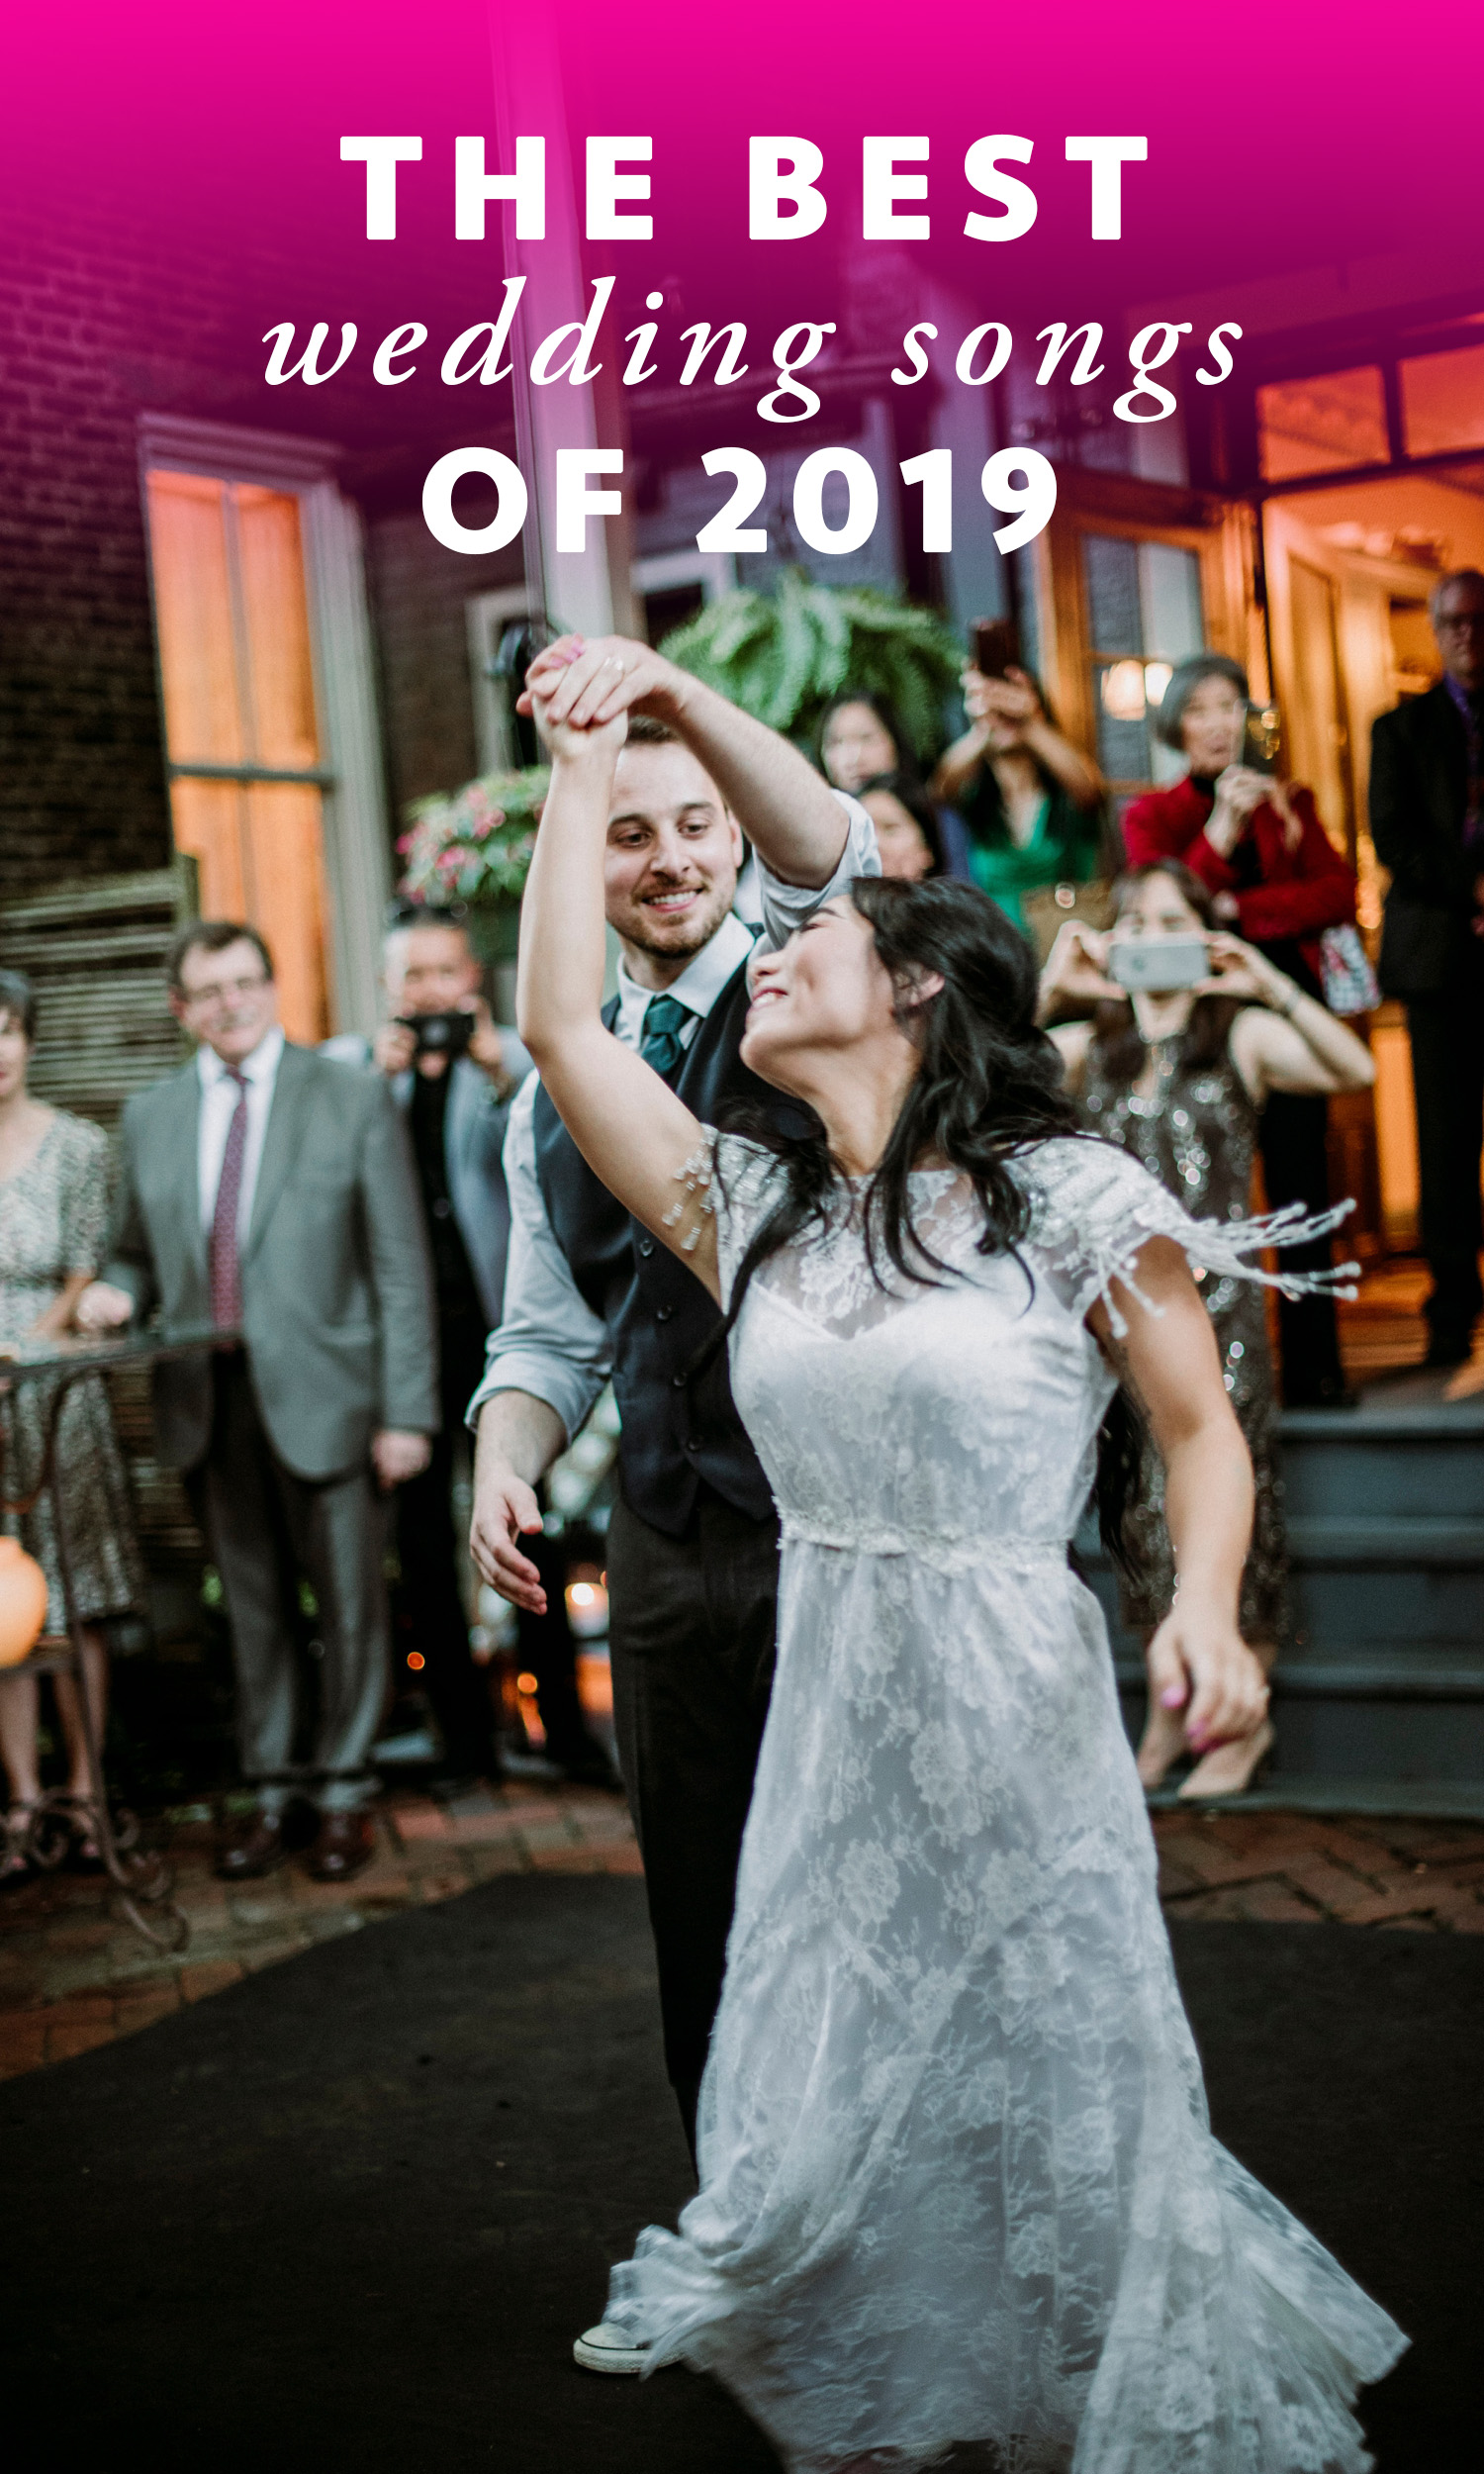 Two people dancing on their wedding day to the best wedding songs of 2019. Text overlaid reads "The Best Wedding Songs of 2019."